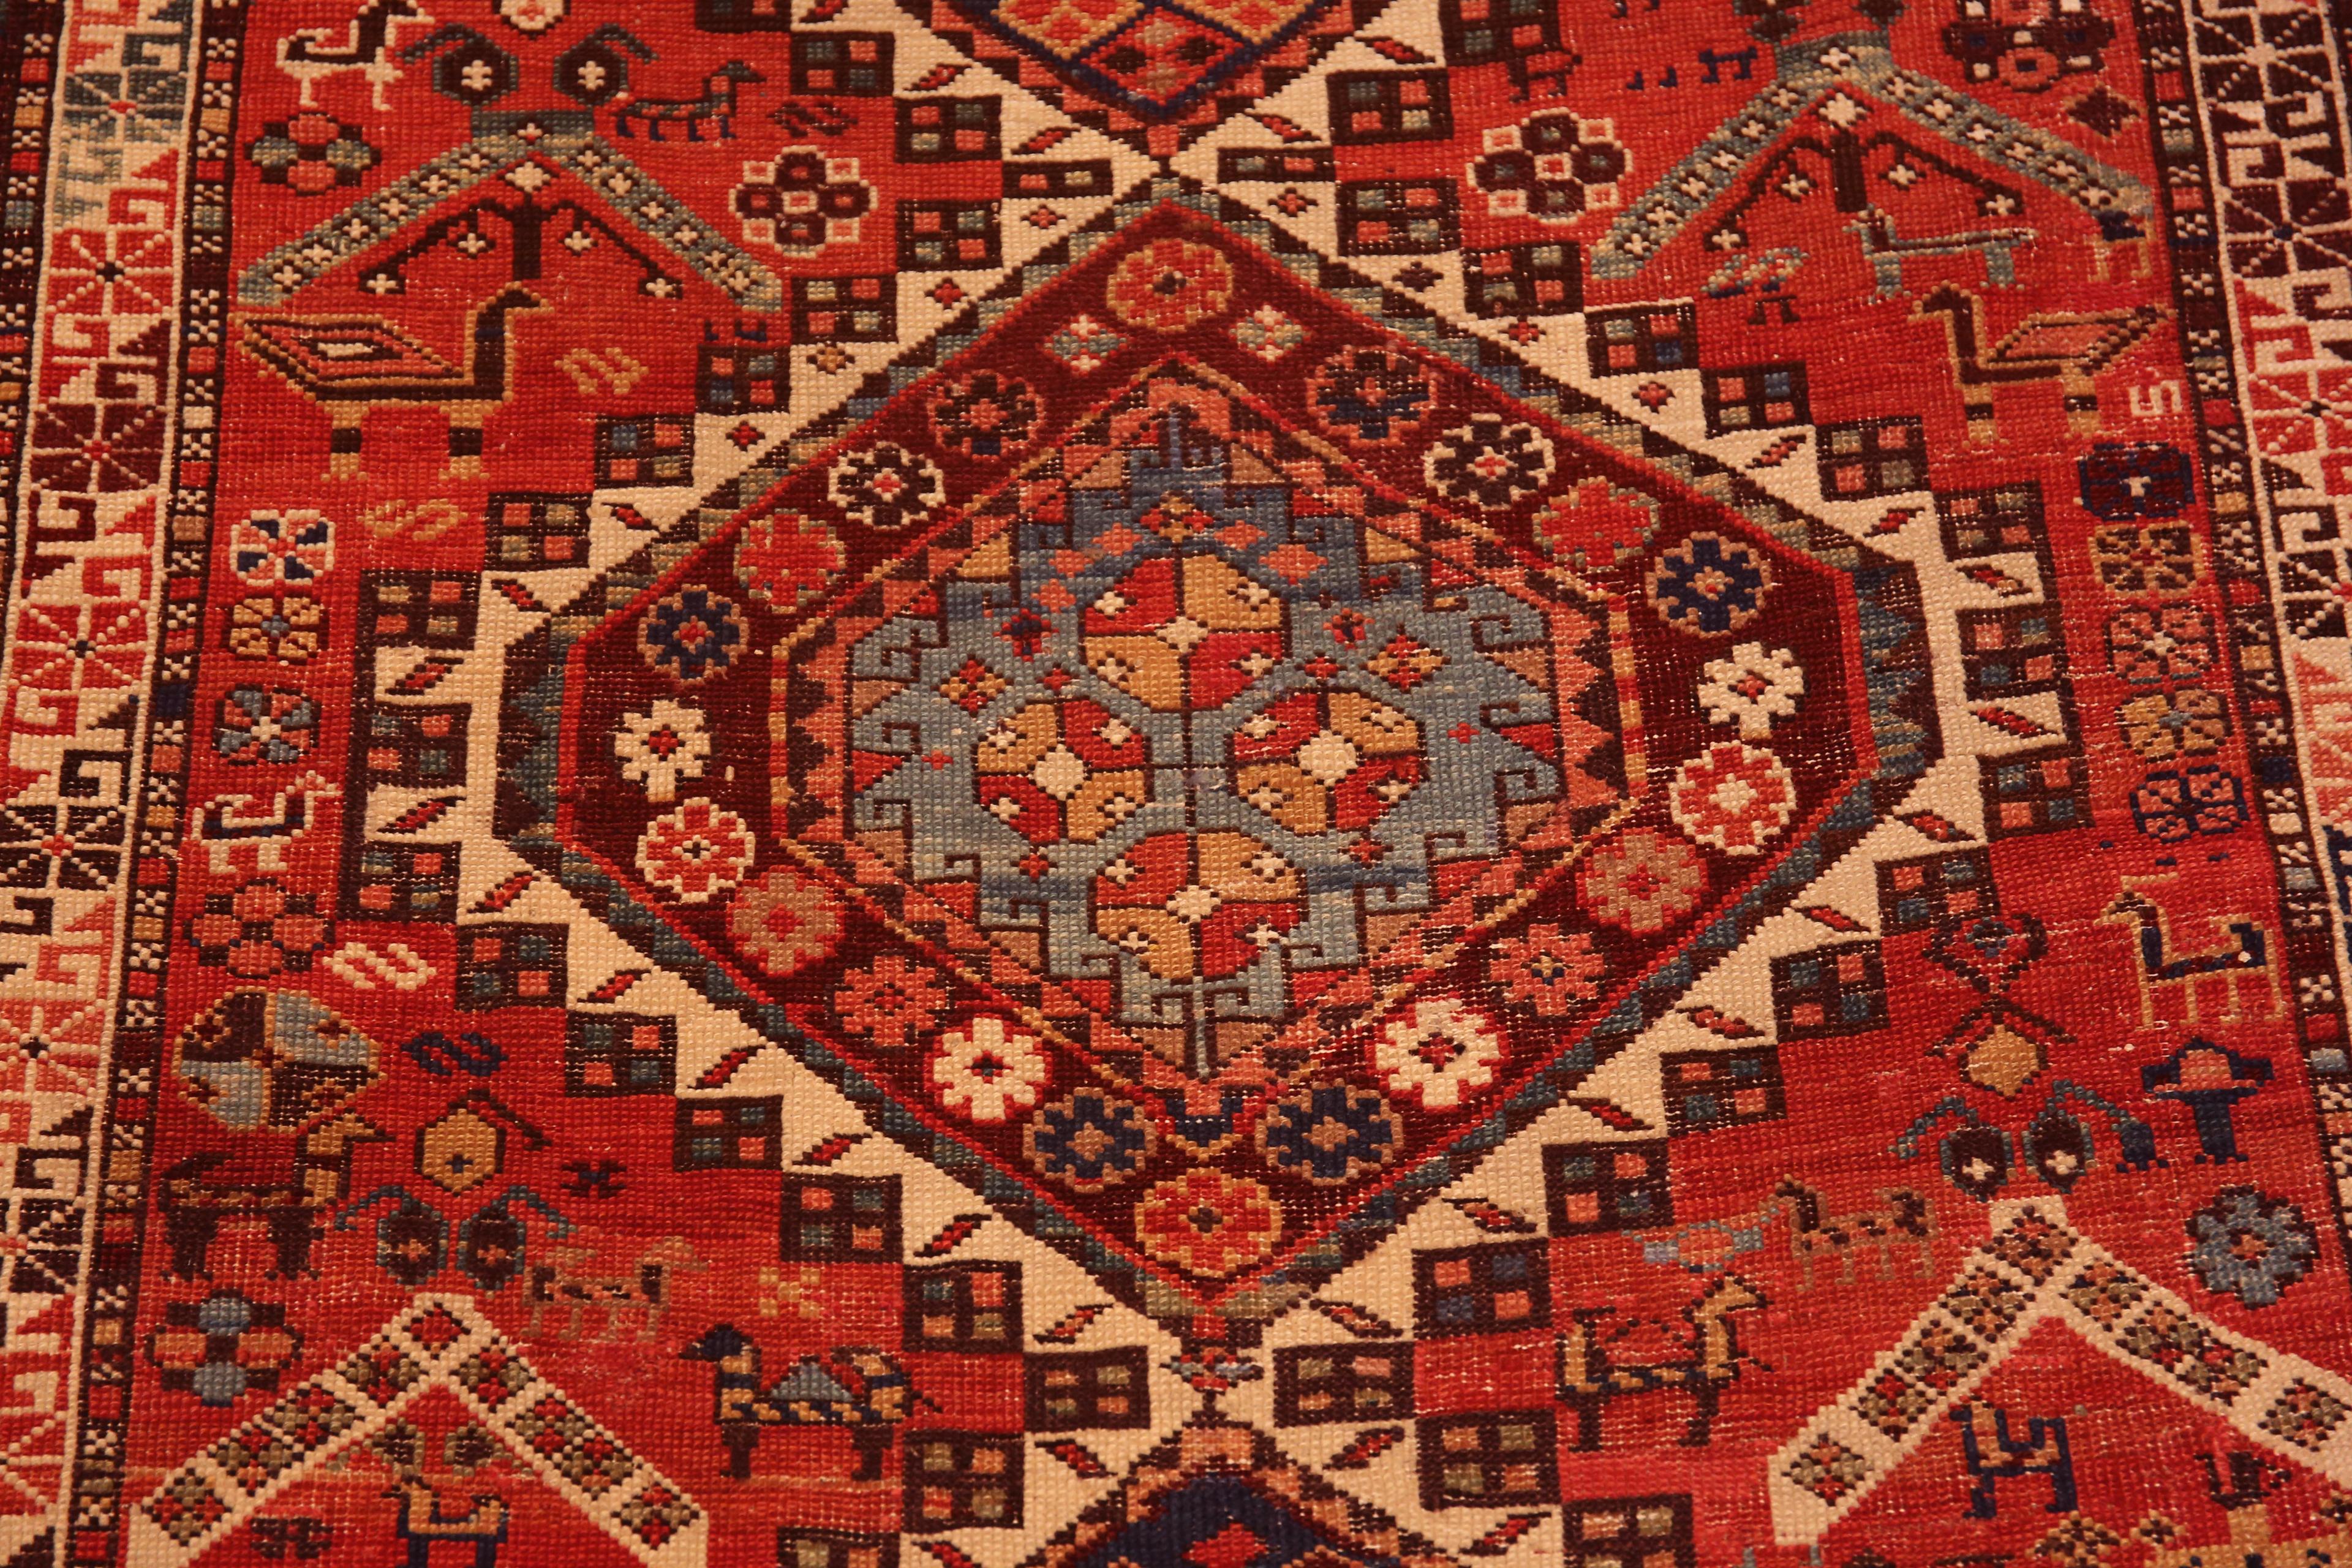 Hand-Knotted Beautiful Tribal Antique Rustic Caucasian Shirvan Animal Area Rug 4' x 5'6